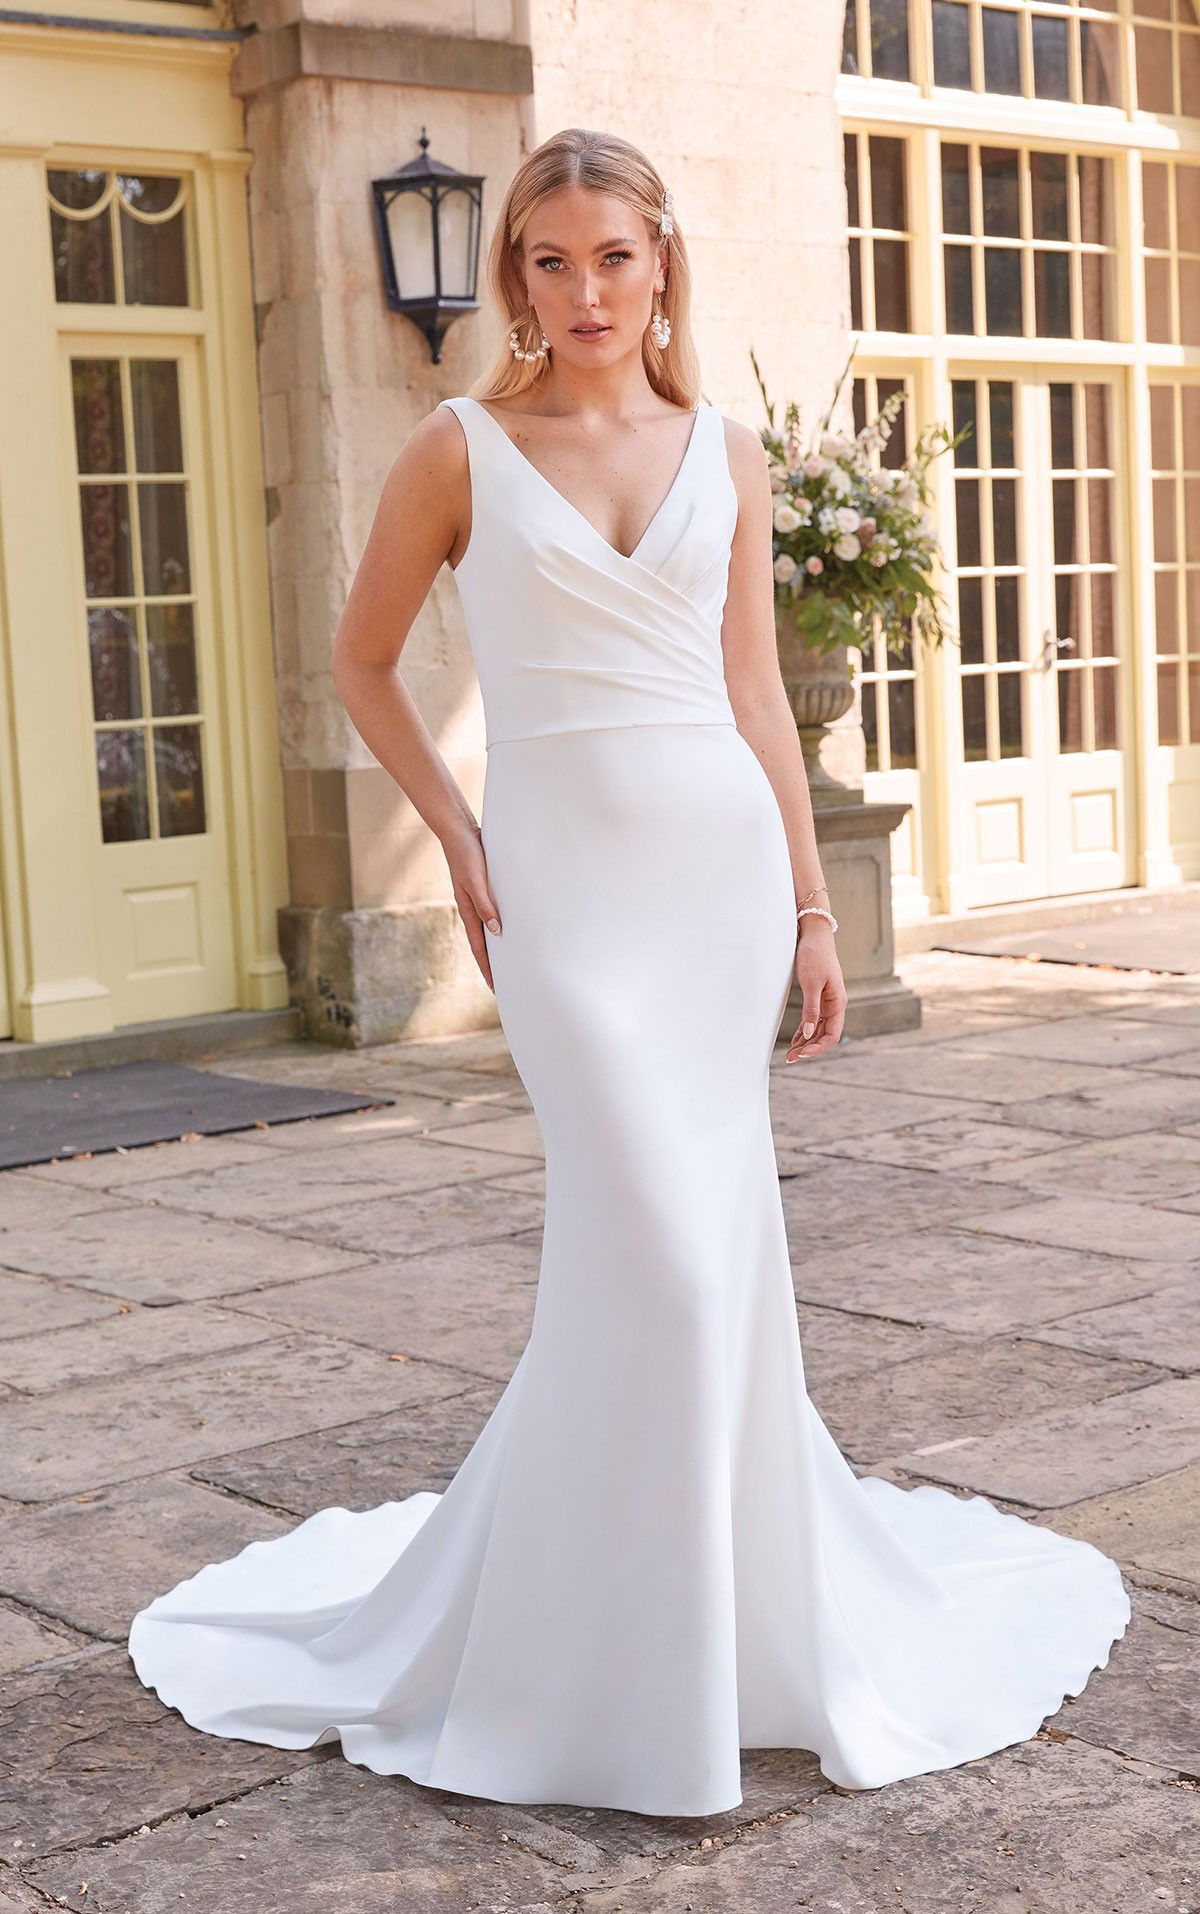 44325 - Anya Size 12 - Justin Alexander -  Sincerity Bridal Elegant Crepe dress with V neckline and pleated bodice with plain fitted skirt. Elegant and Simple bridal designs at Blessings Bridal Shop Loyal Parade, Mill Rise, Westdene, Brighton. East Sussex. BN1 5GG T: 01273 505766 E: info@blessingsbridal.co.uk